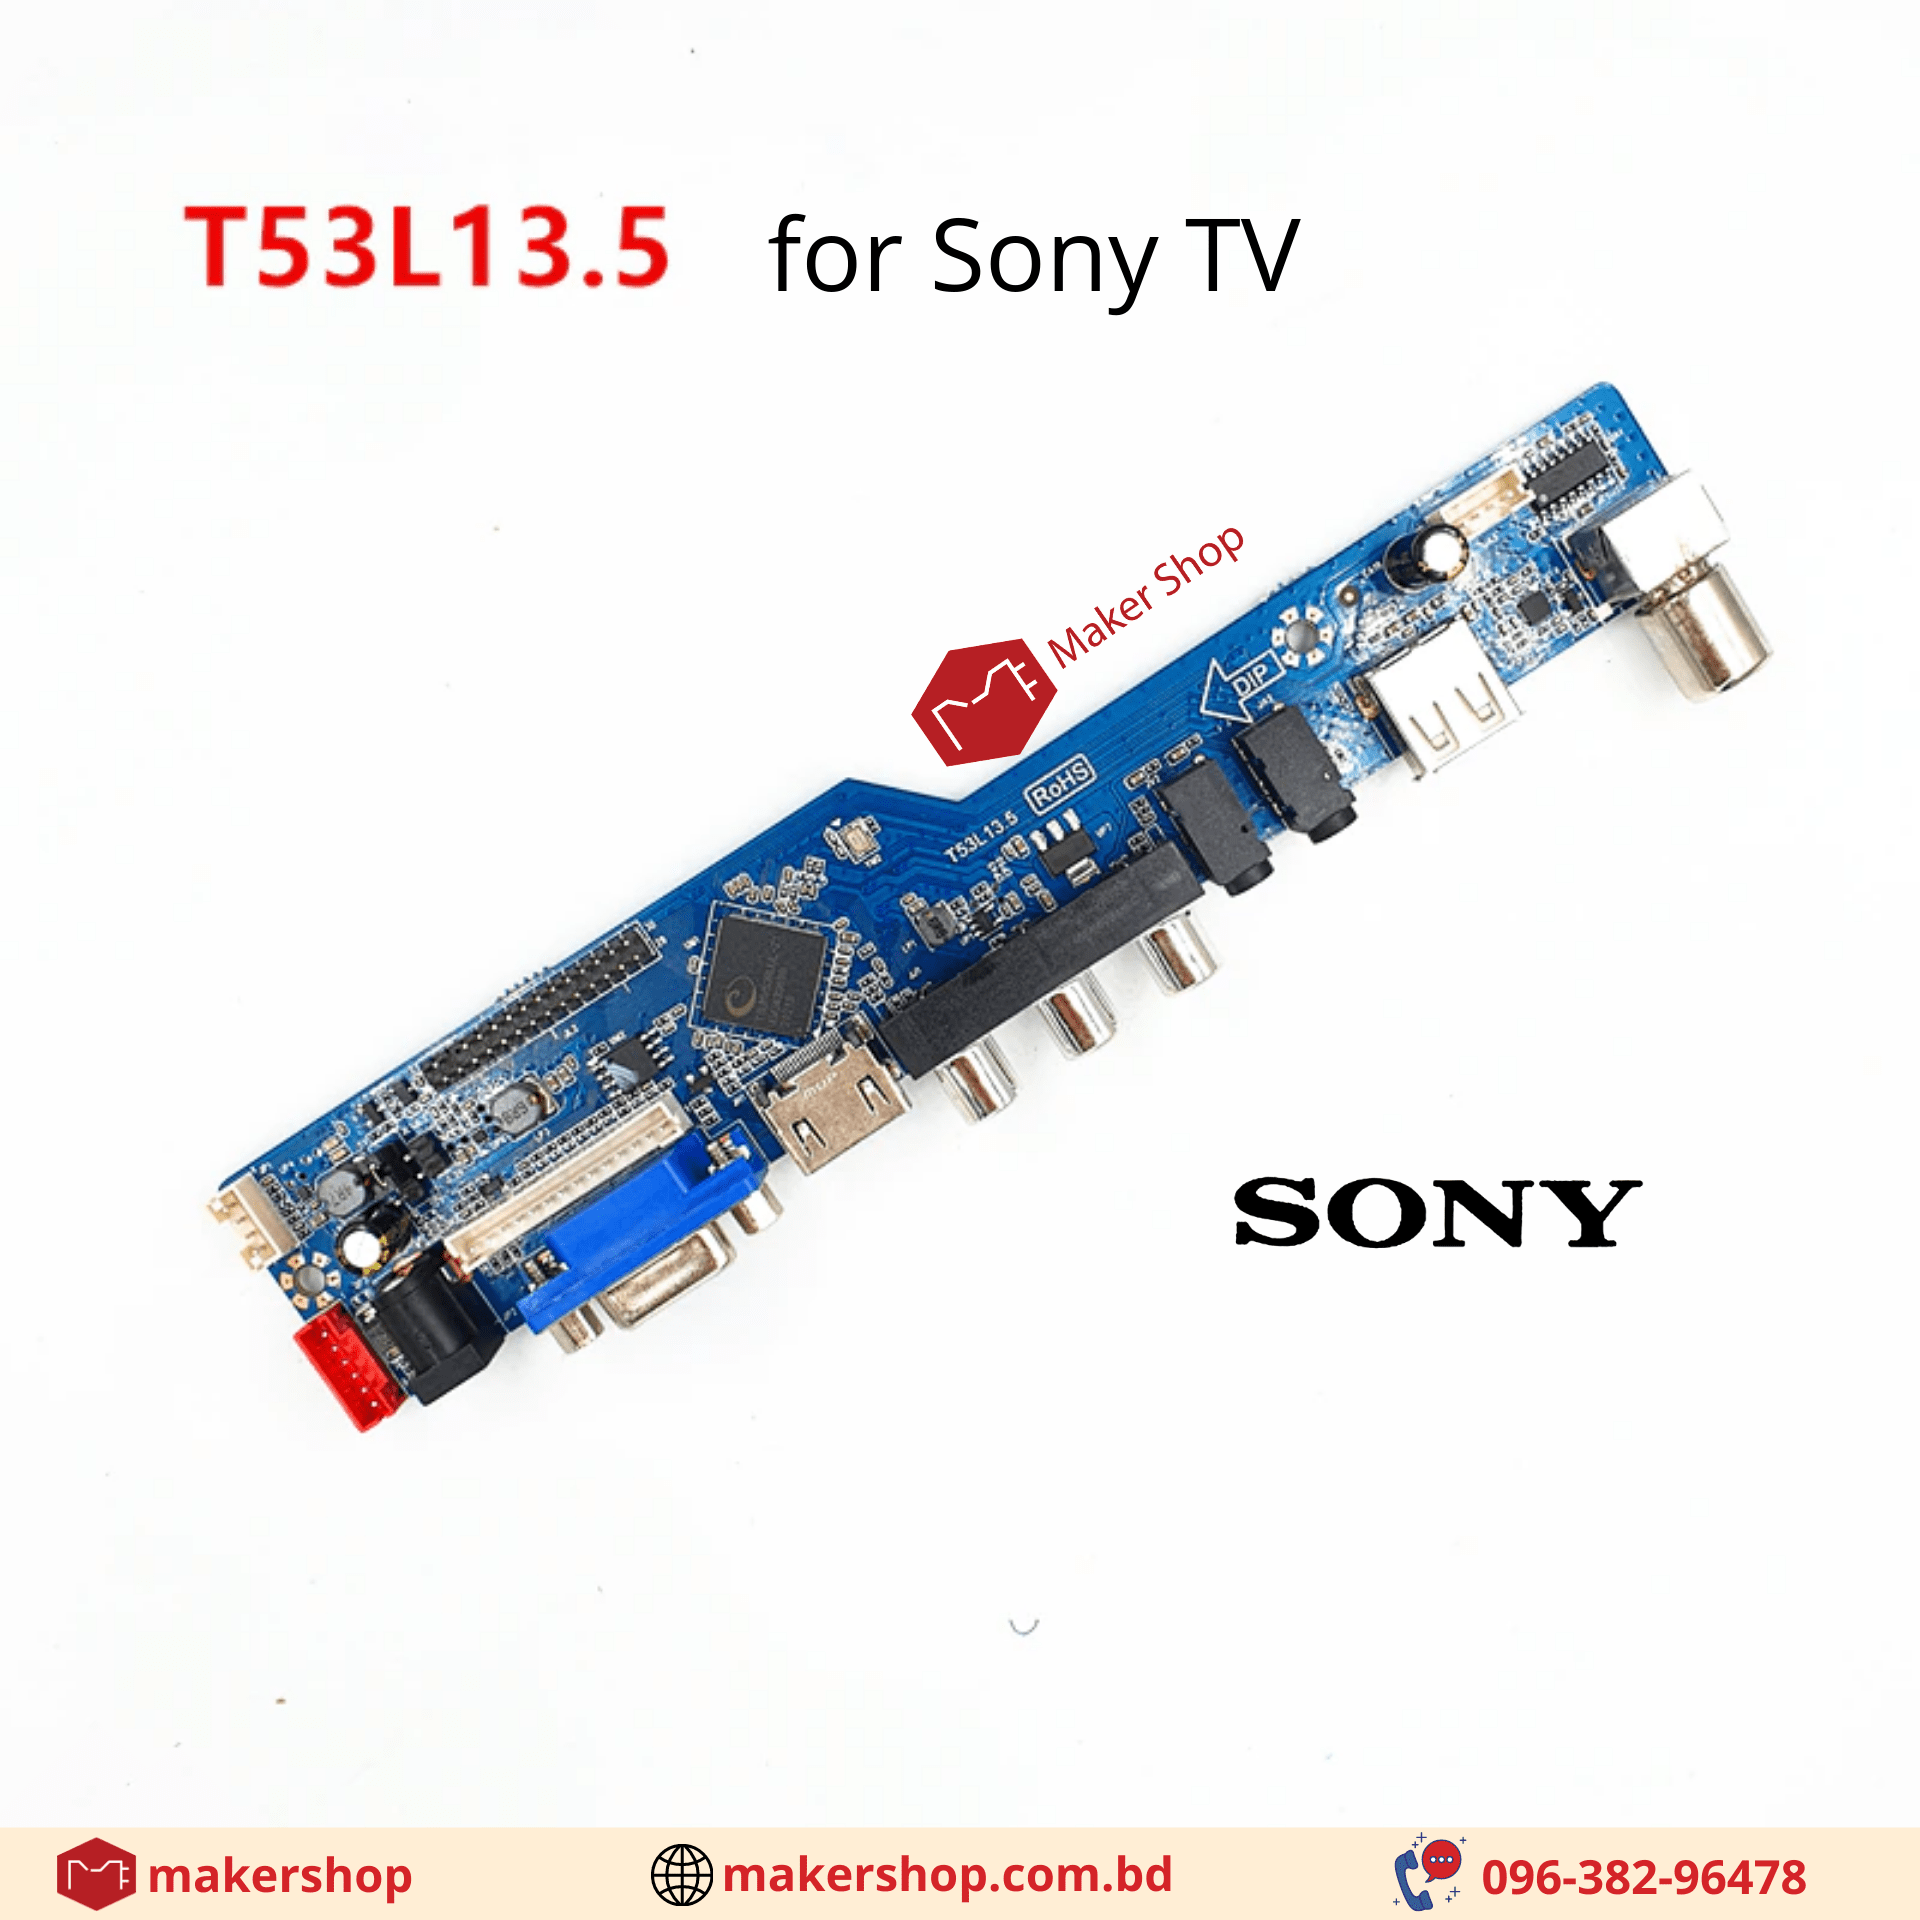 T53L13.5 TV Motherboard for Sony TV Motherboard Replacement